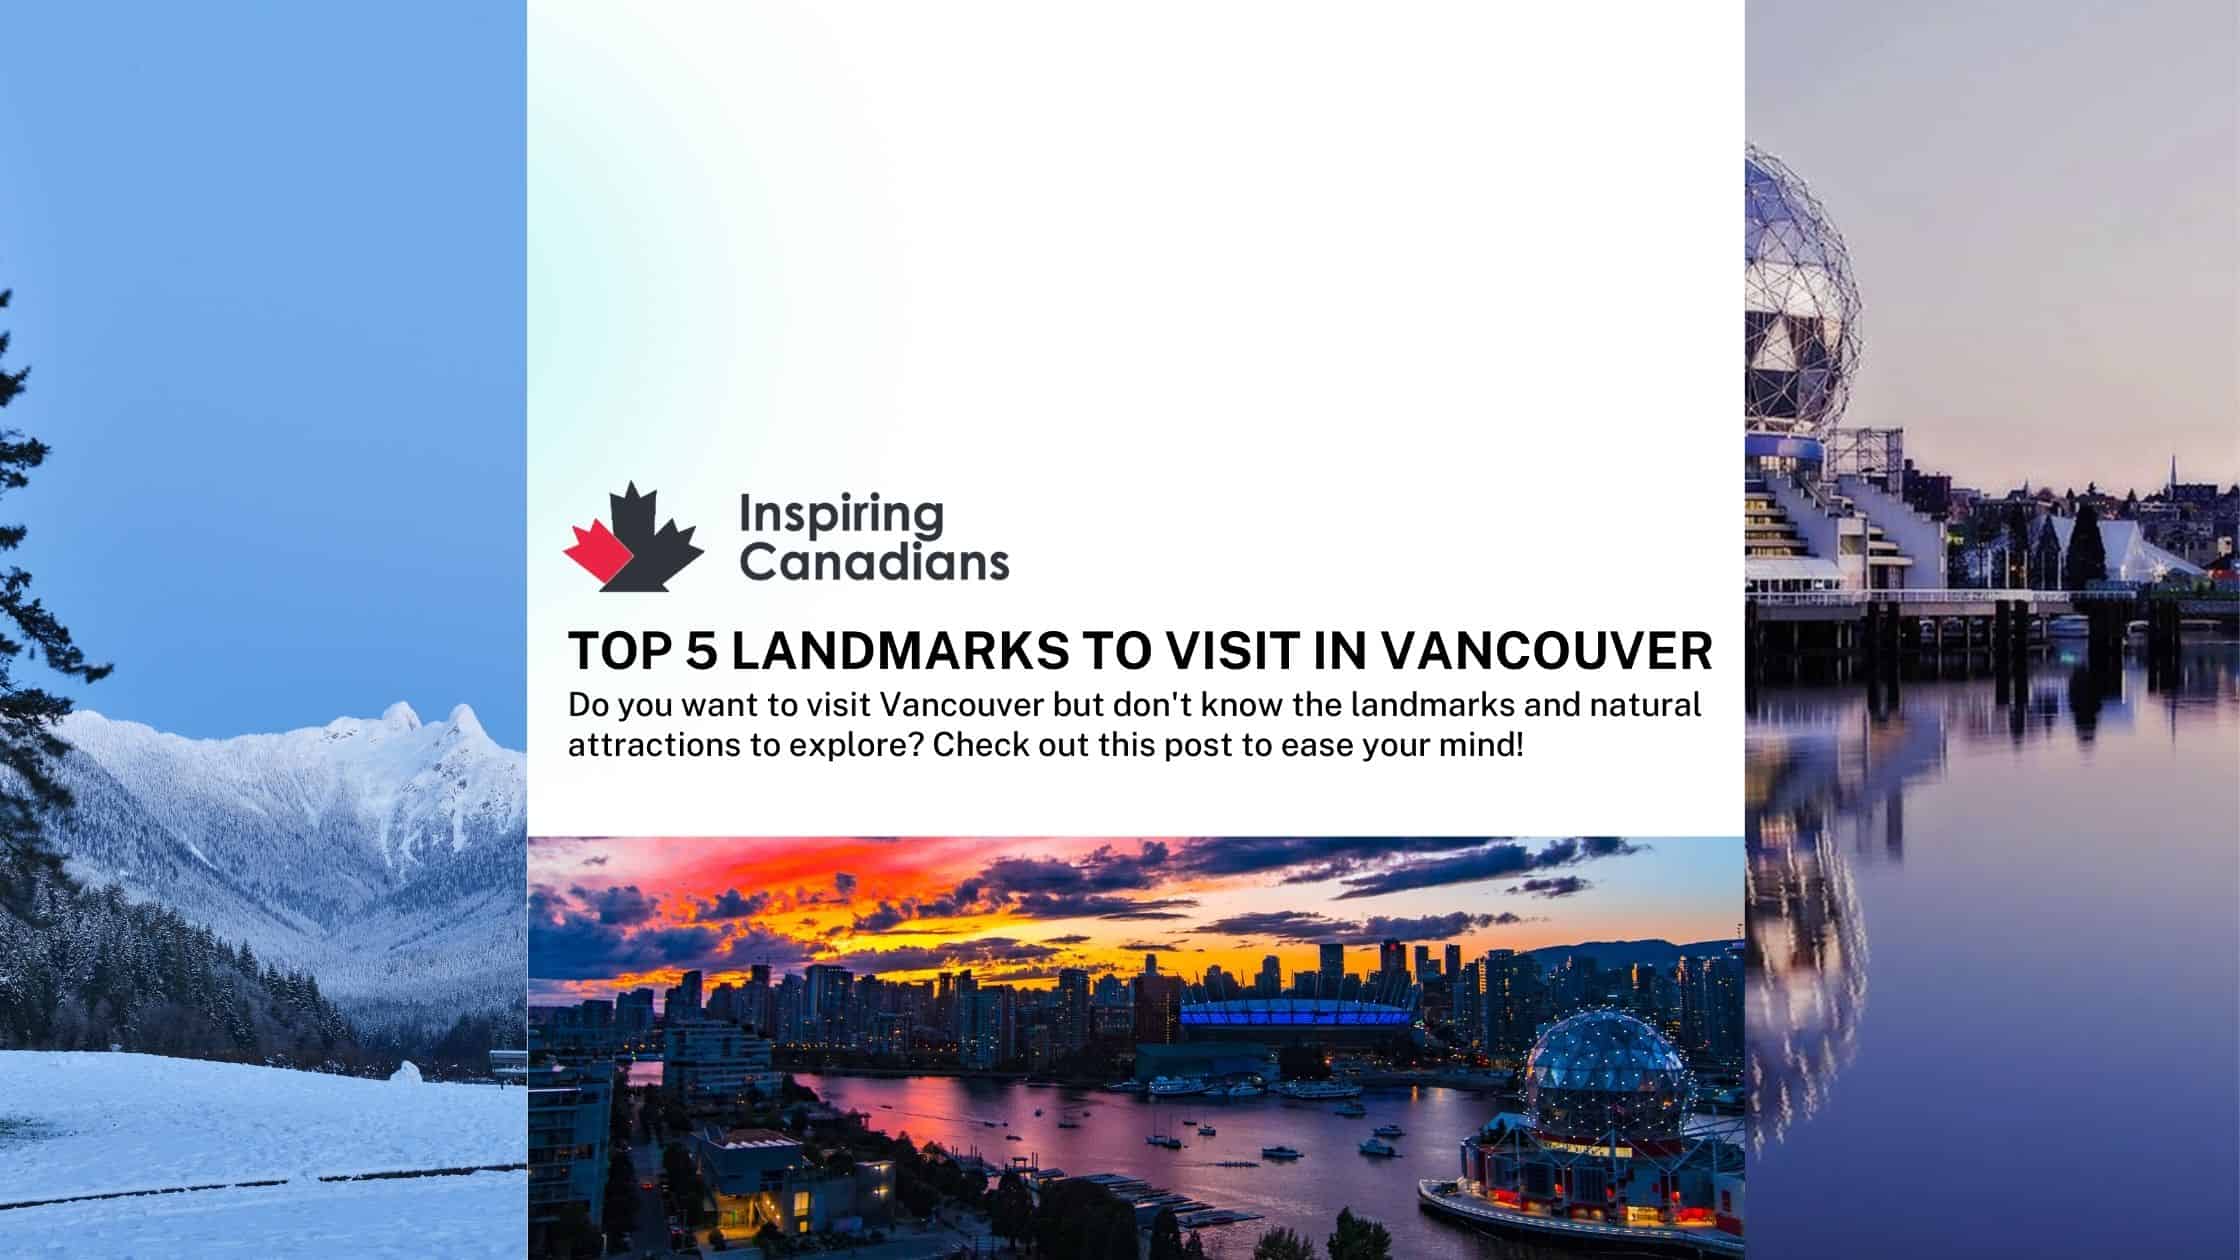 Top 5 Landmarks to Visit in Vancouver